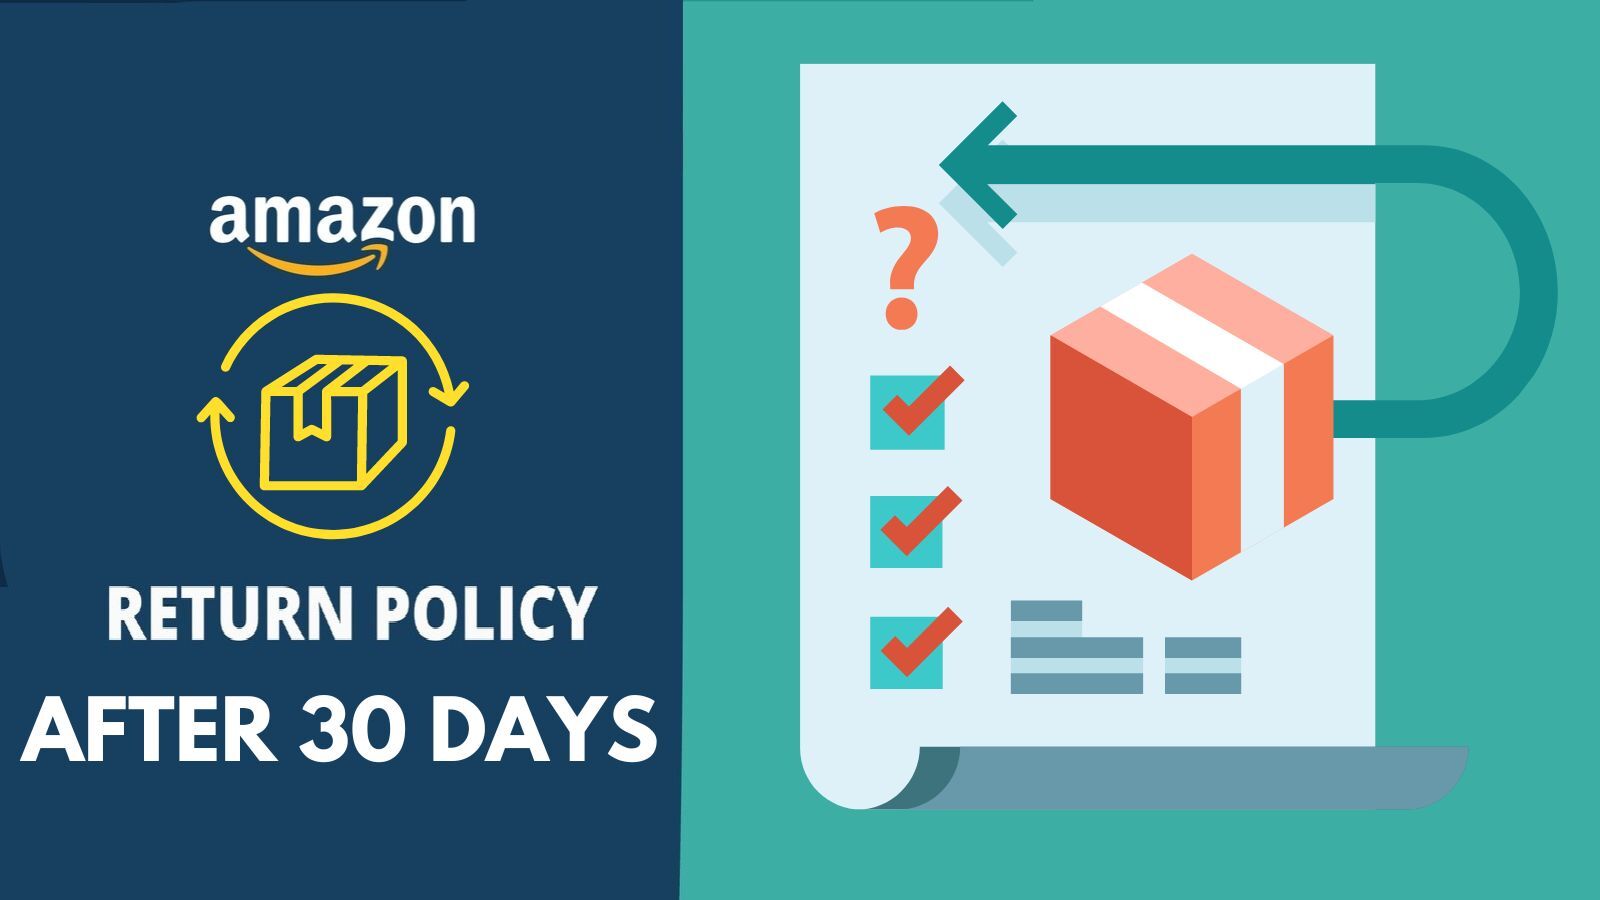 Amazon Return Policy After 30 Days (Steps, Timeframe, Refunds + More